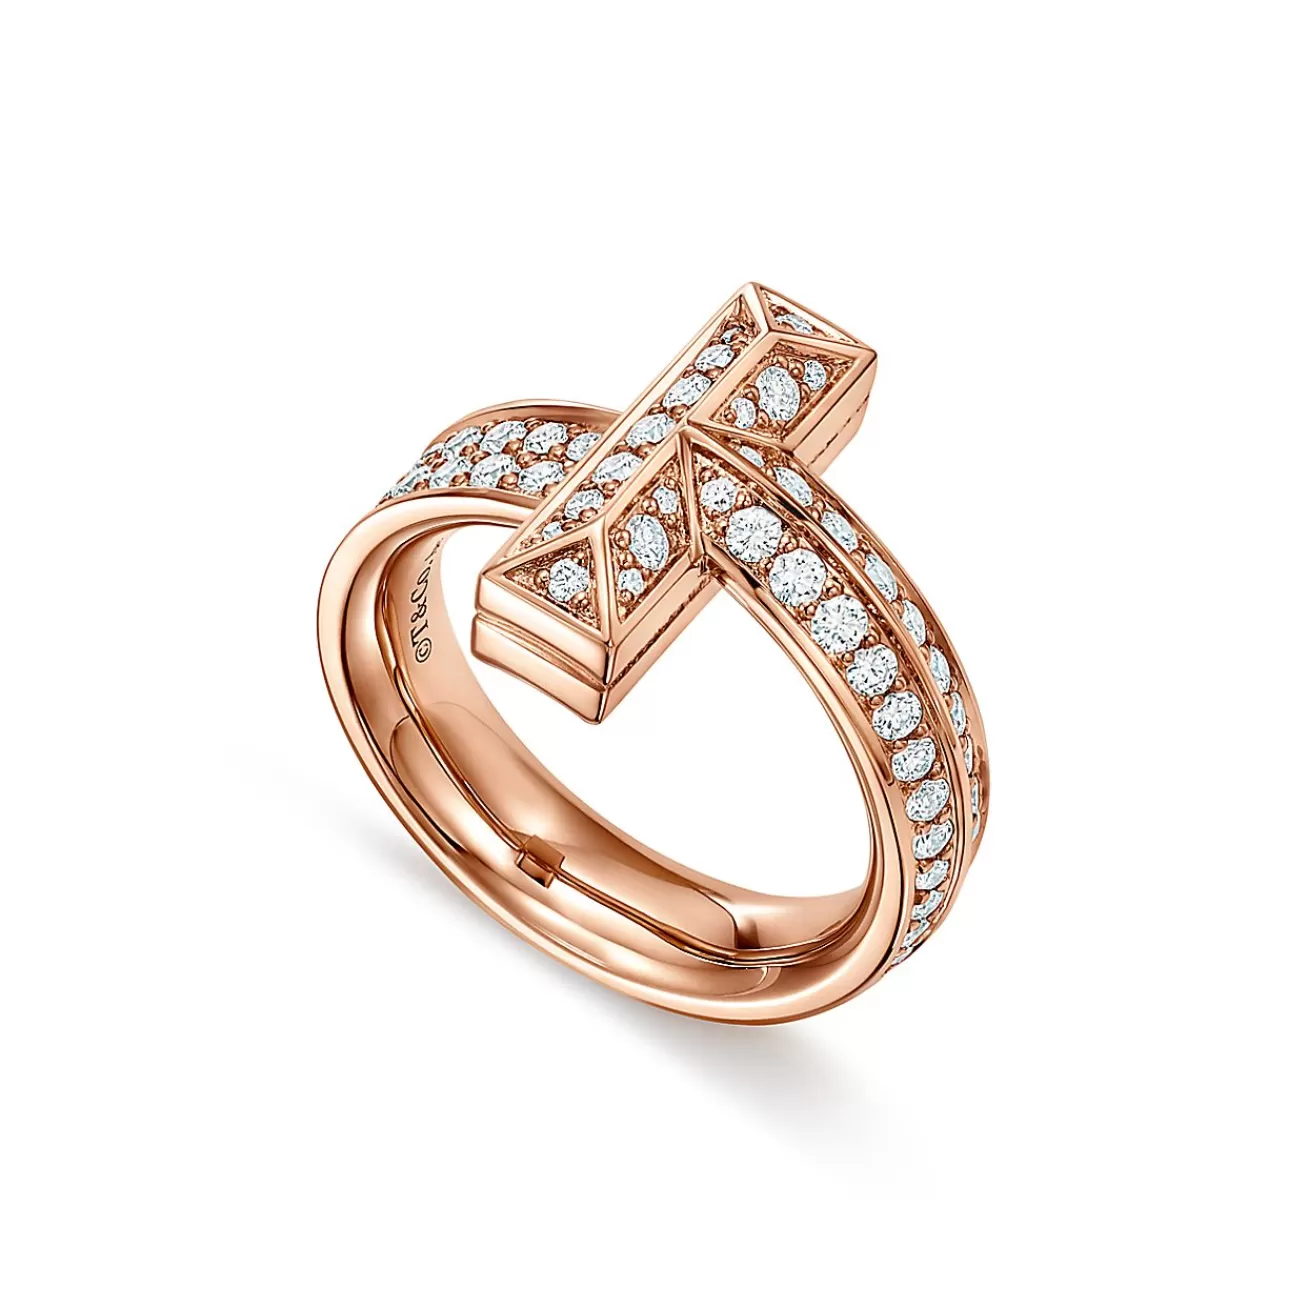 Tiffany & Co. Tiffany T T1 Ring in Rose Gold with Diamonds, 4.5 mm | ^ Rings | Rose Gold Jewelry